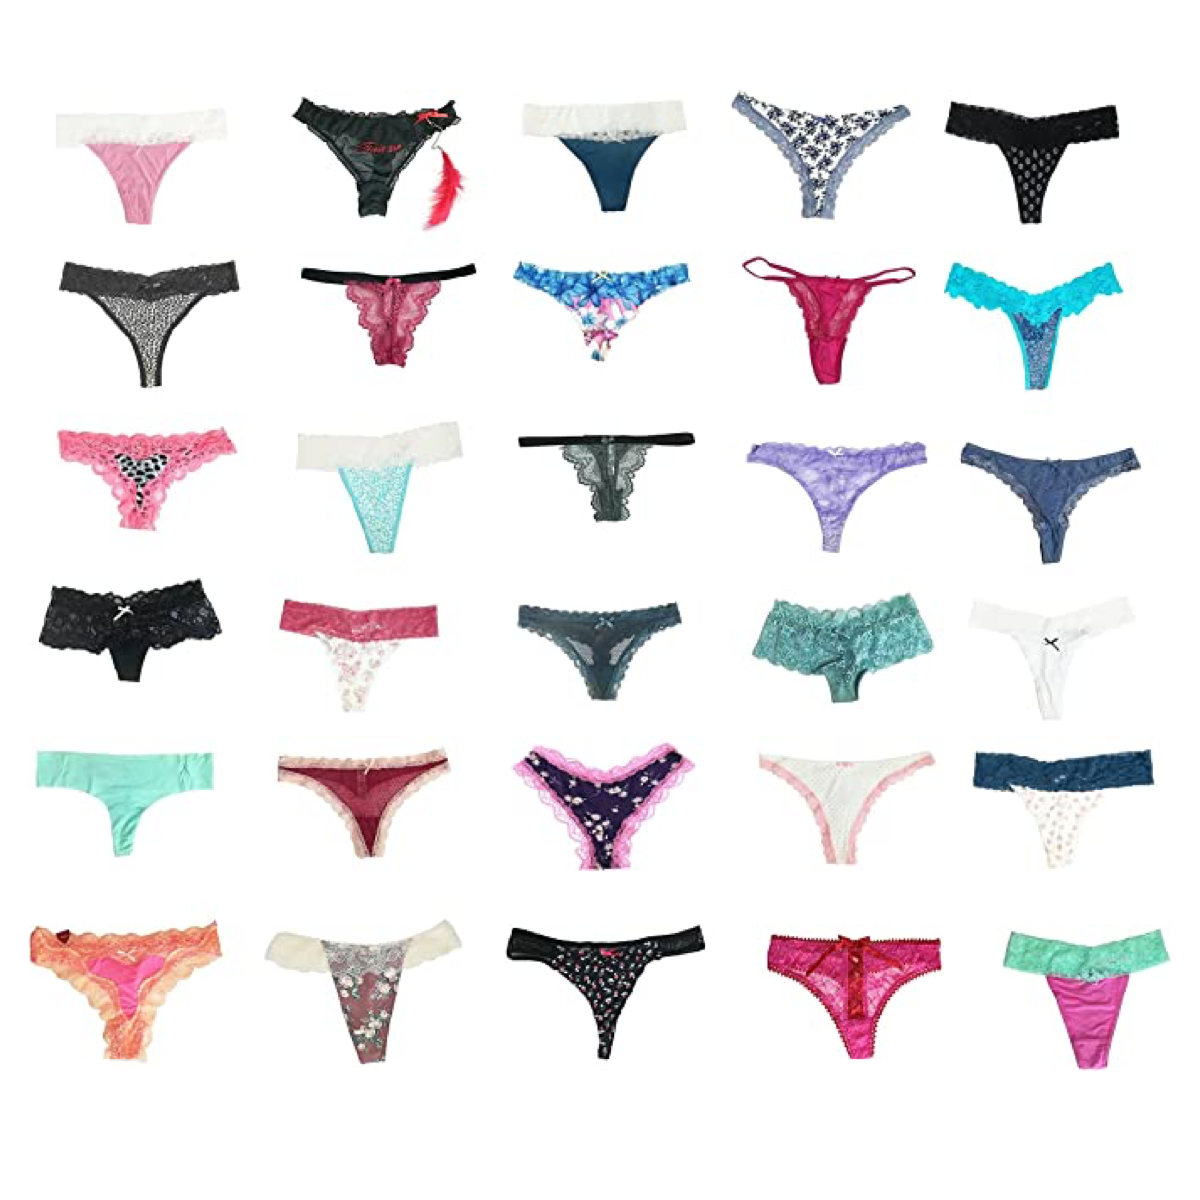 Cheap Deals on Shopper-Fave Underwear From Amazon to Shop ASAP